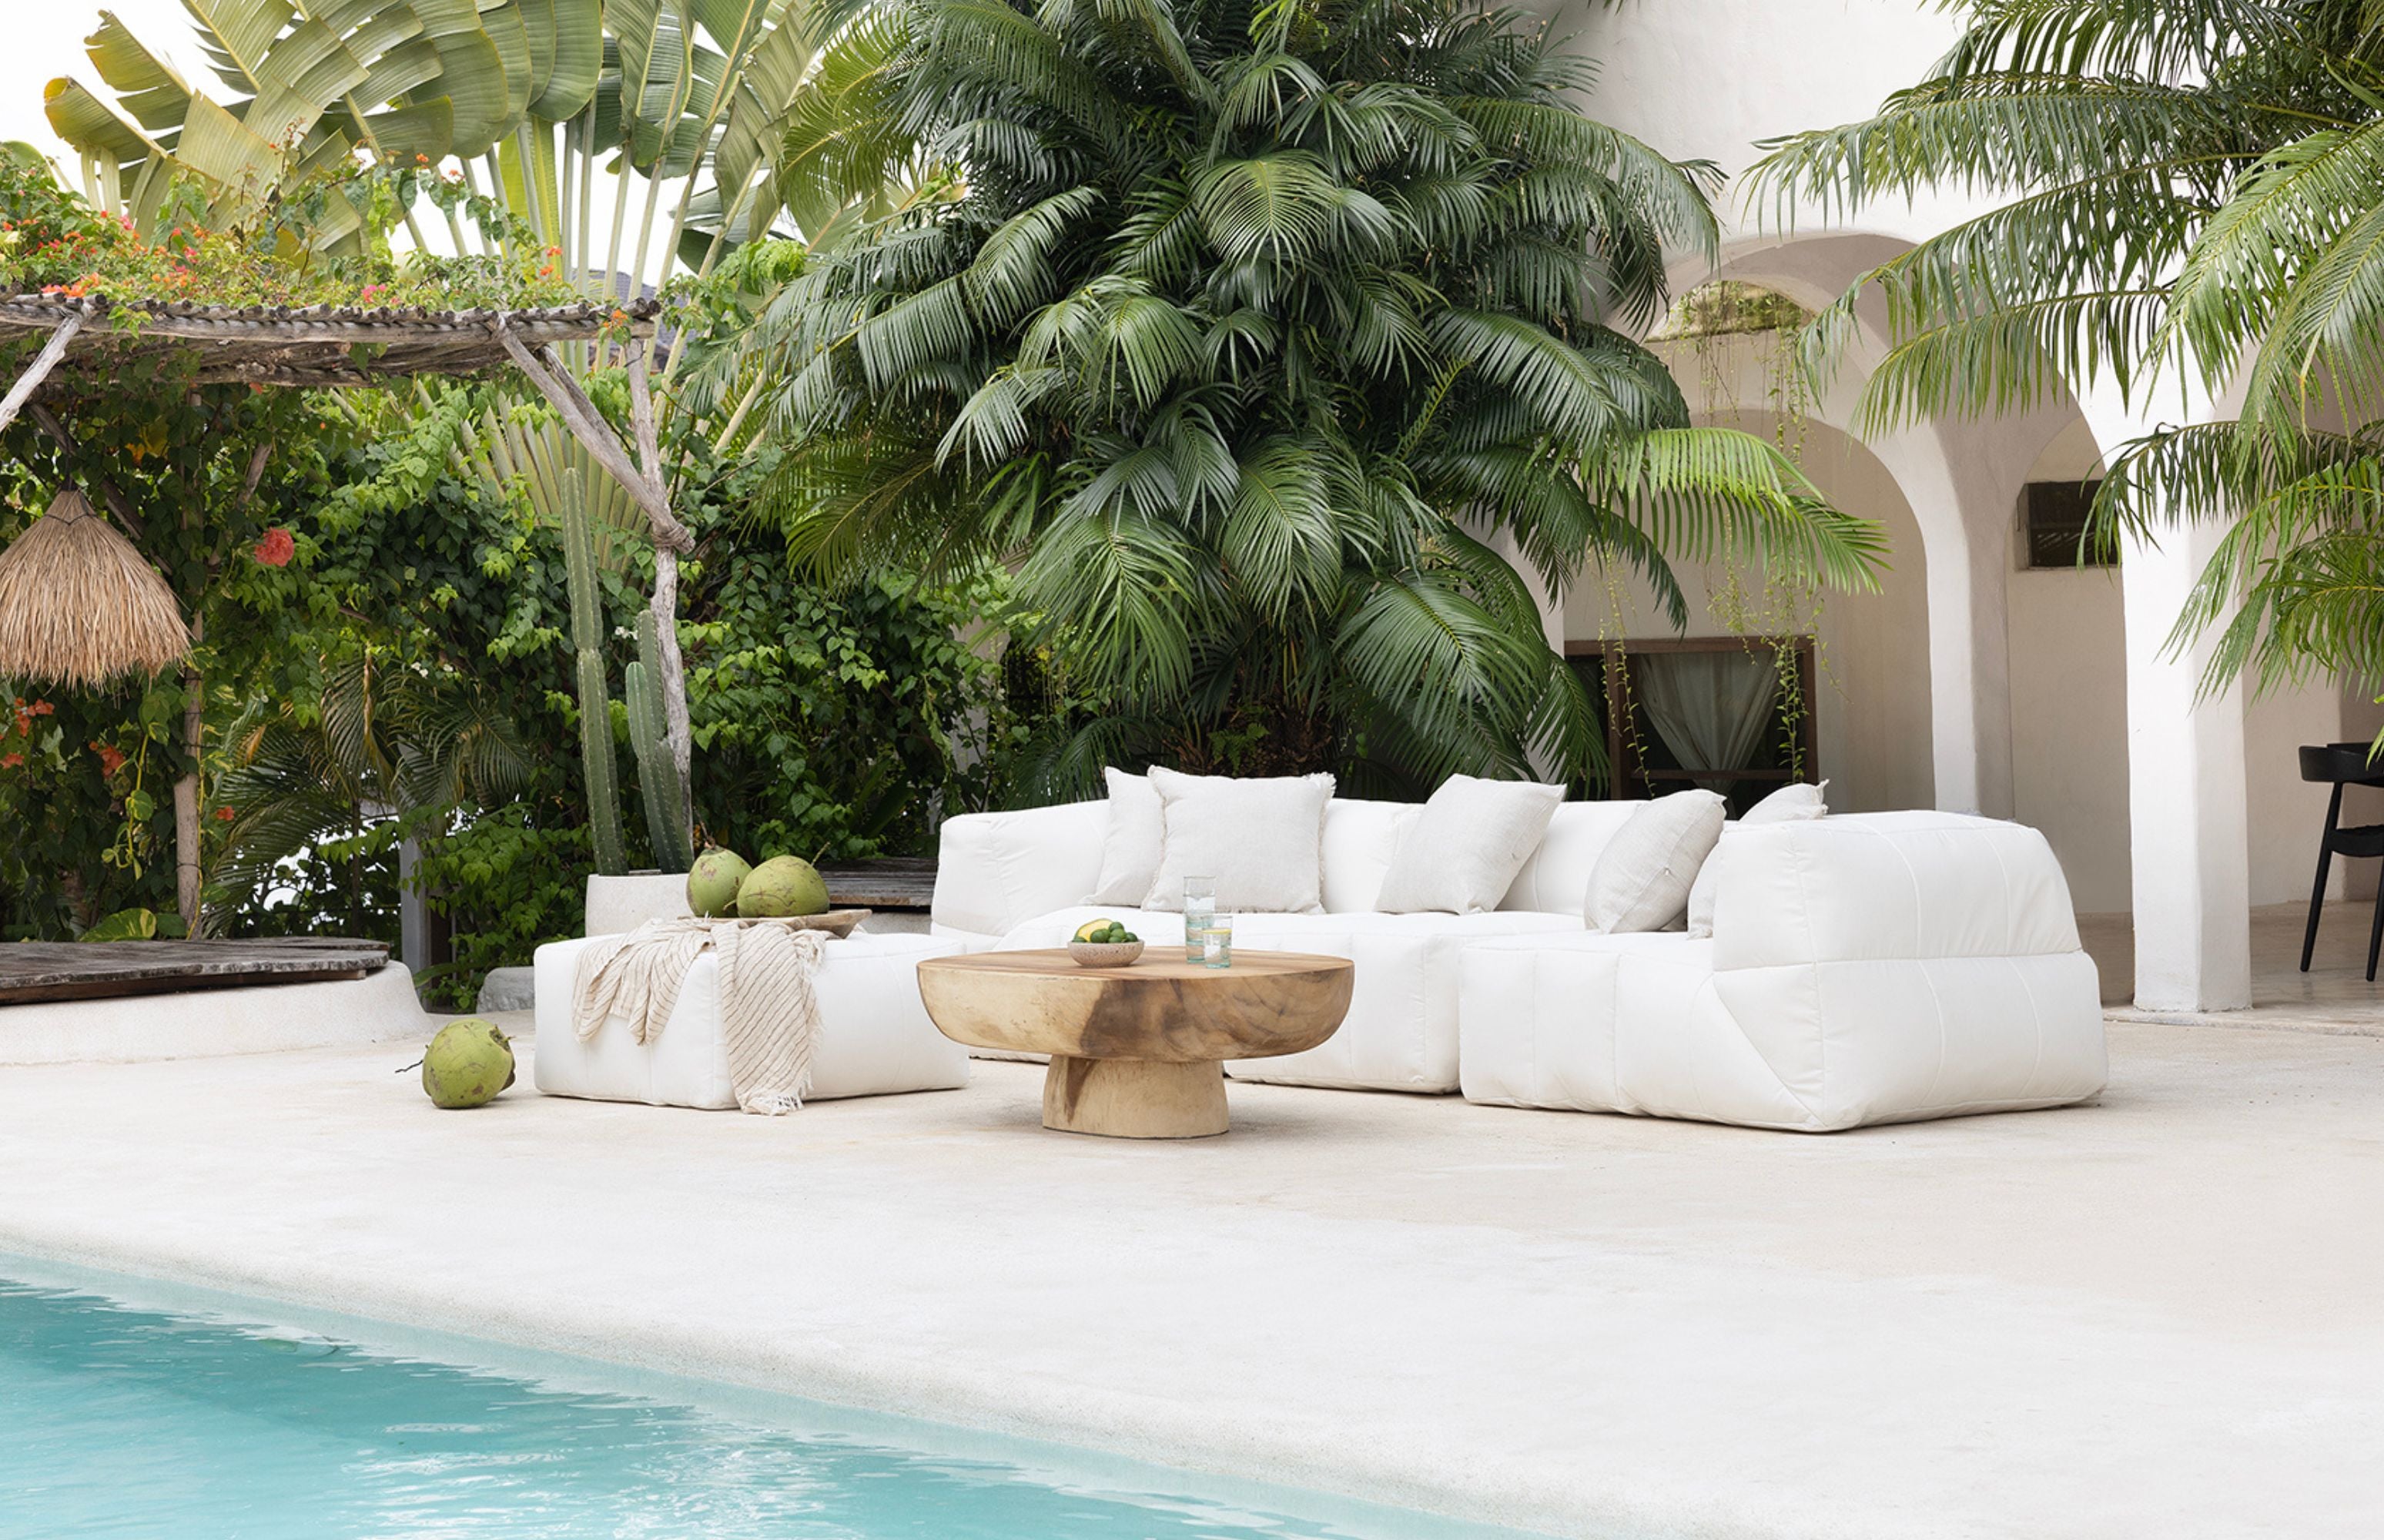 Transform Your Summer with Hermosa Living's Outdoor Furniture Collection